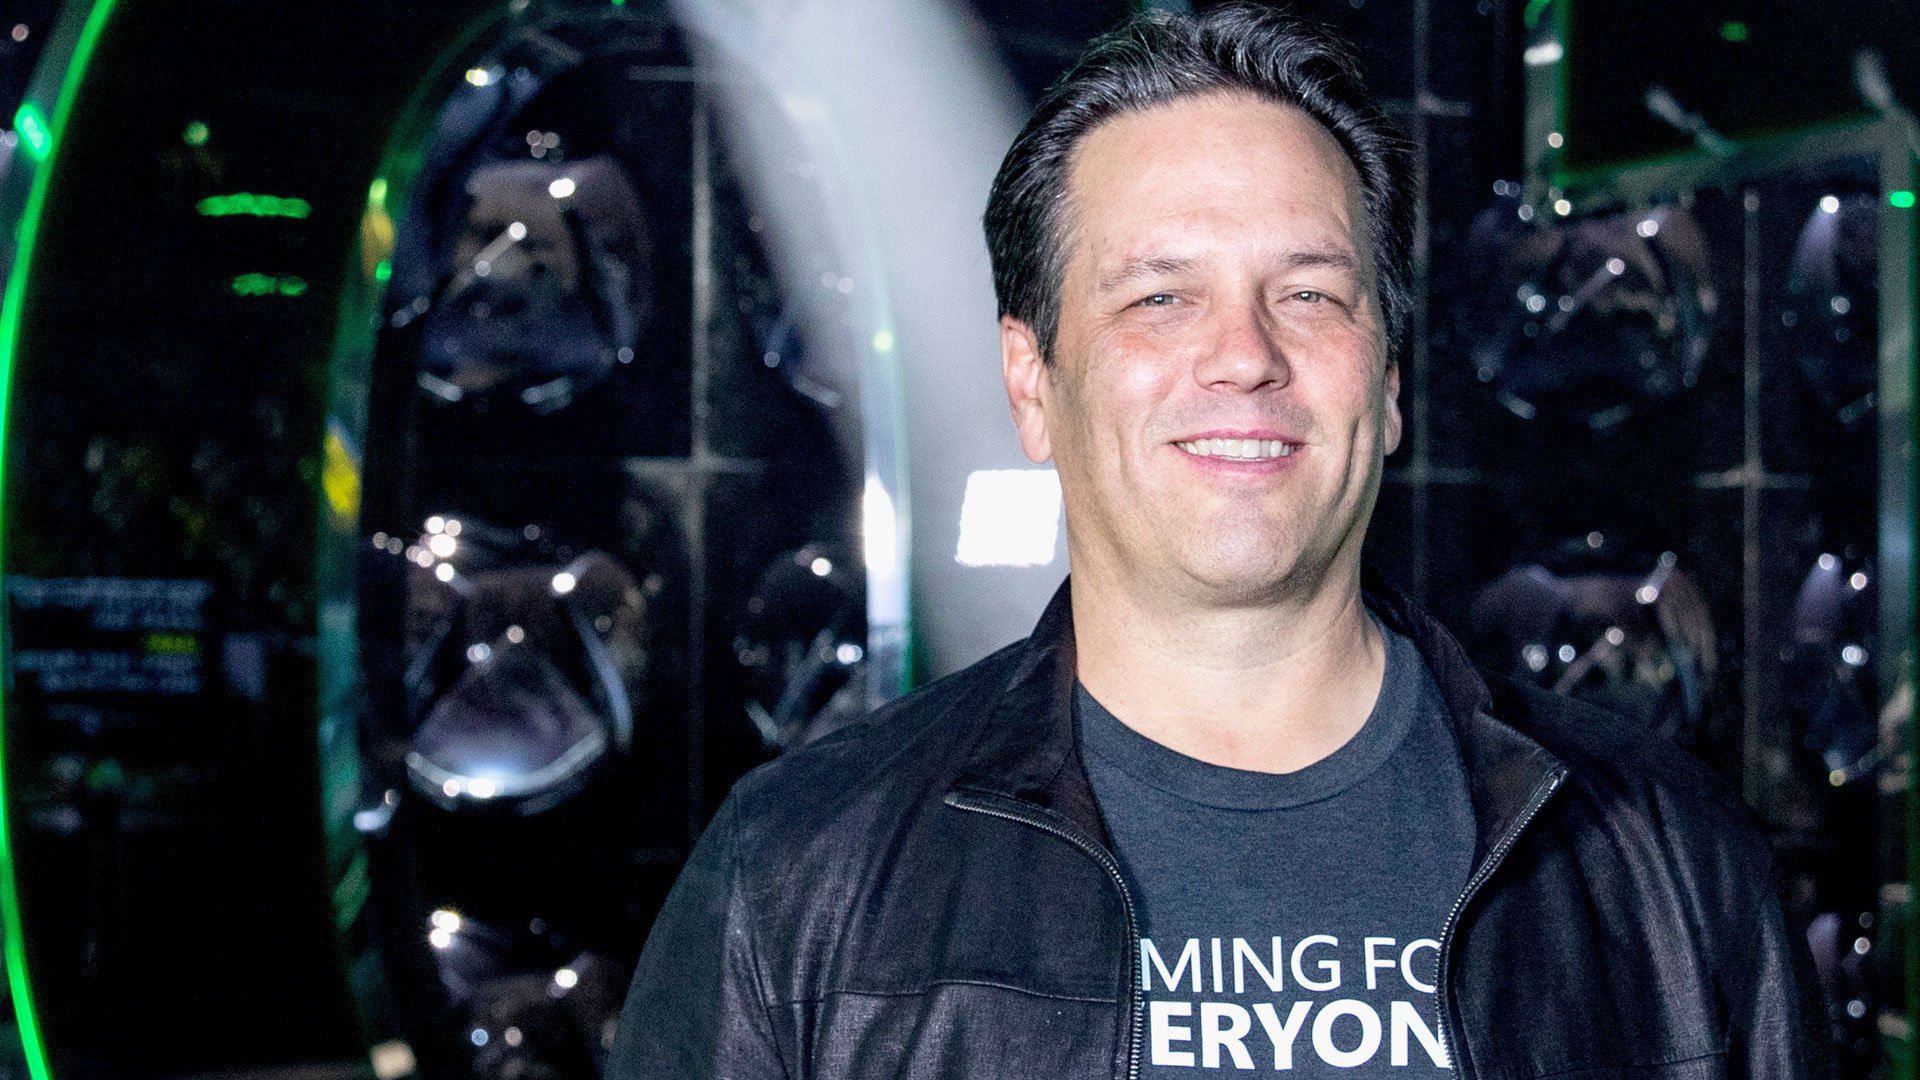 Rethink Gaming - Phil Spencer really made every PS5 user cry a